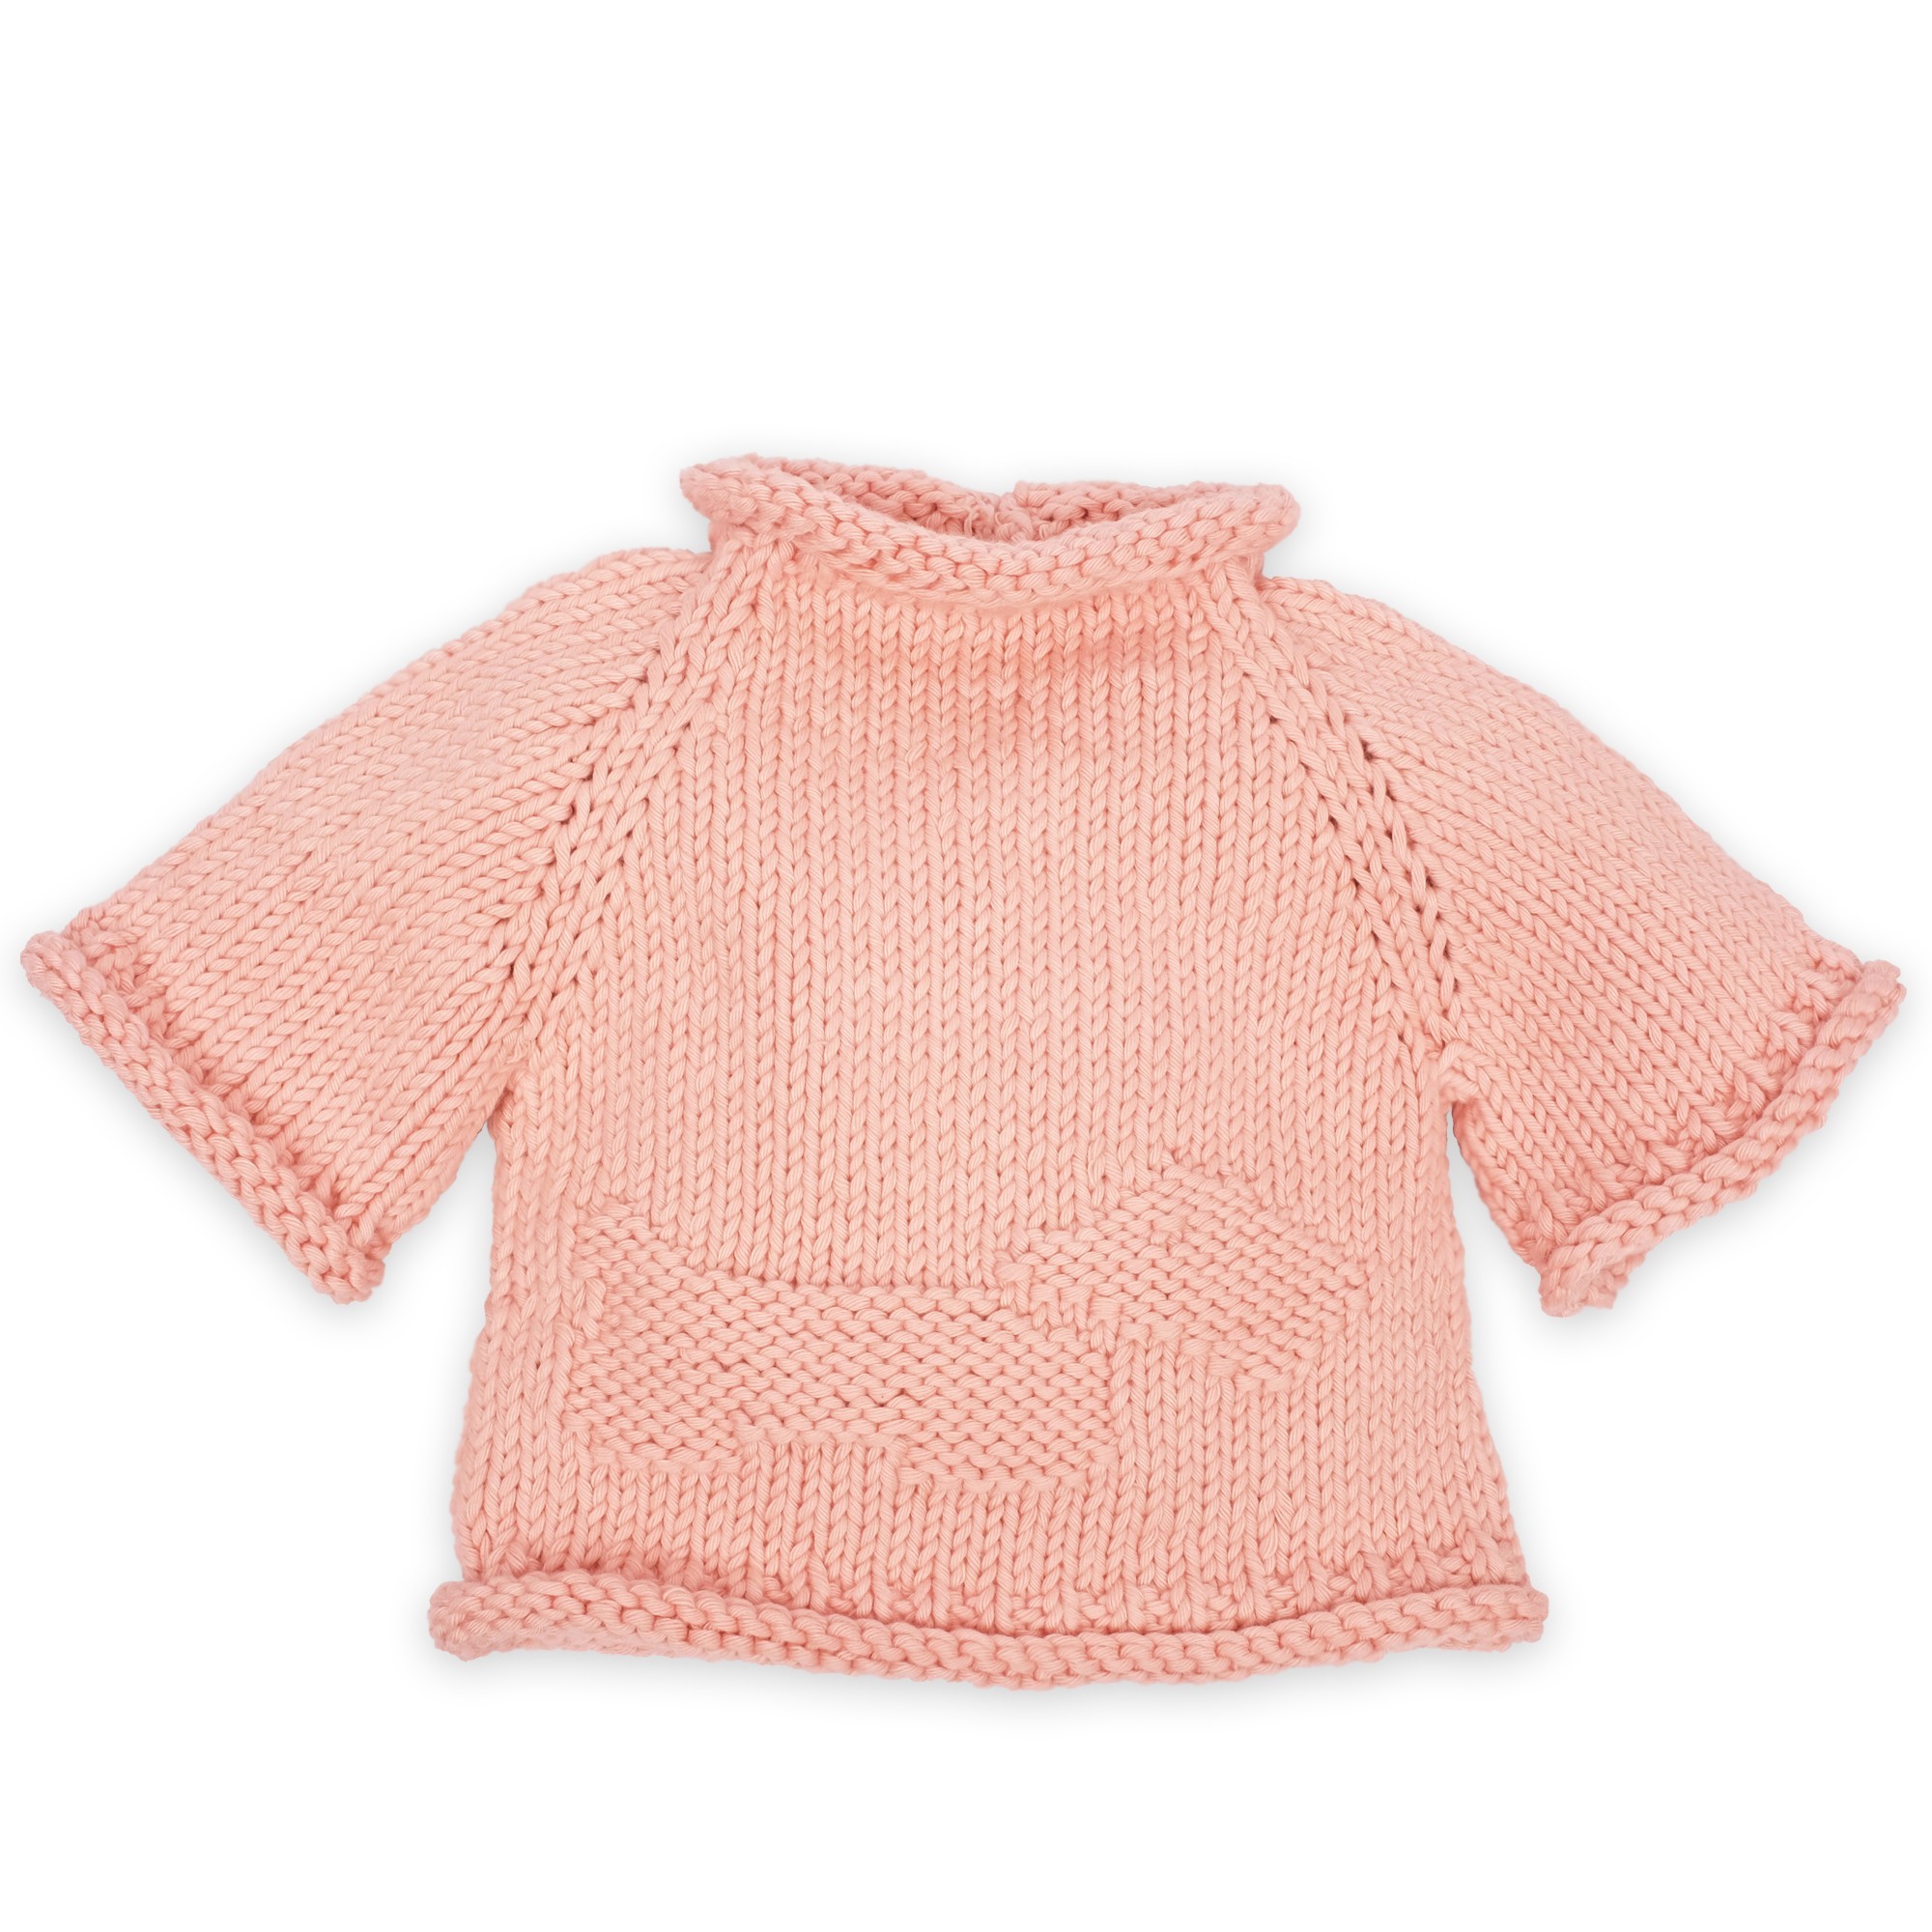 Mamy Factory sweater: dragee pink baby sweater Germain knitted in ...